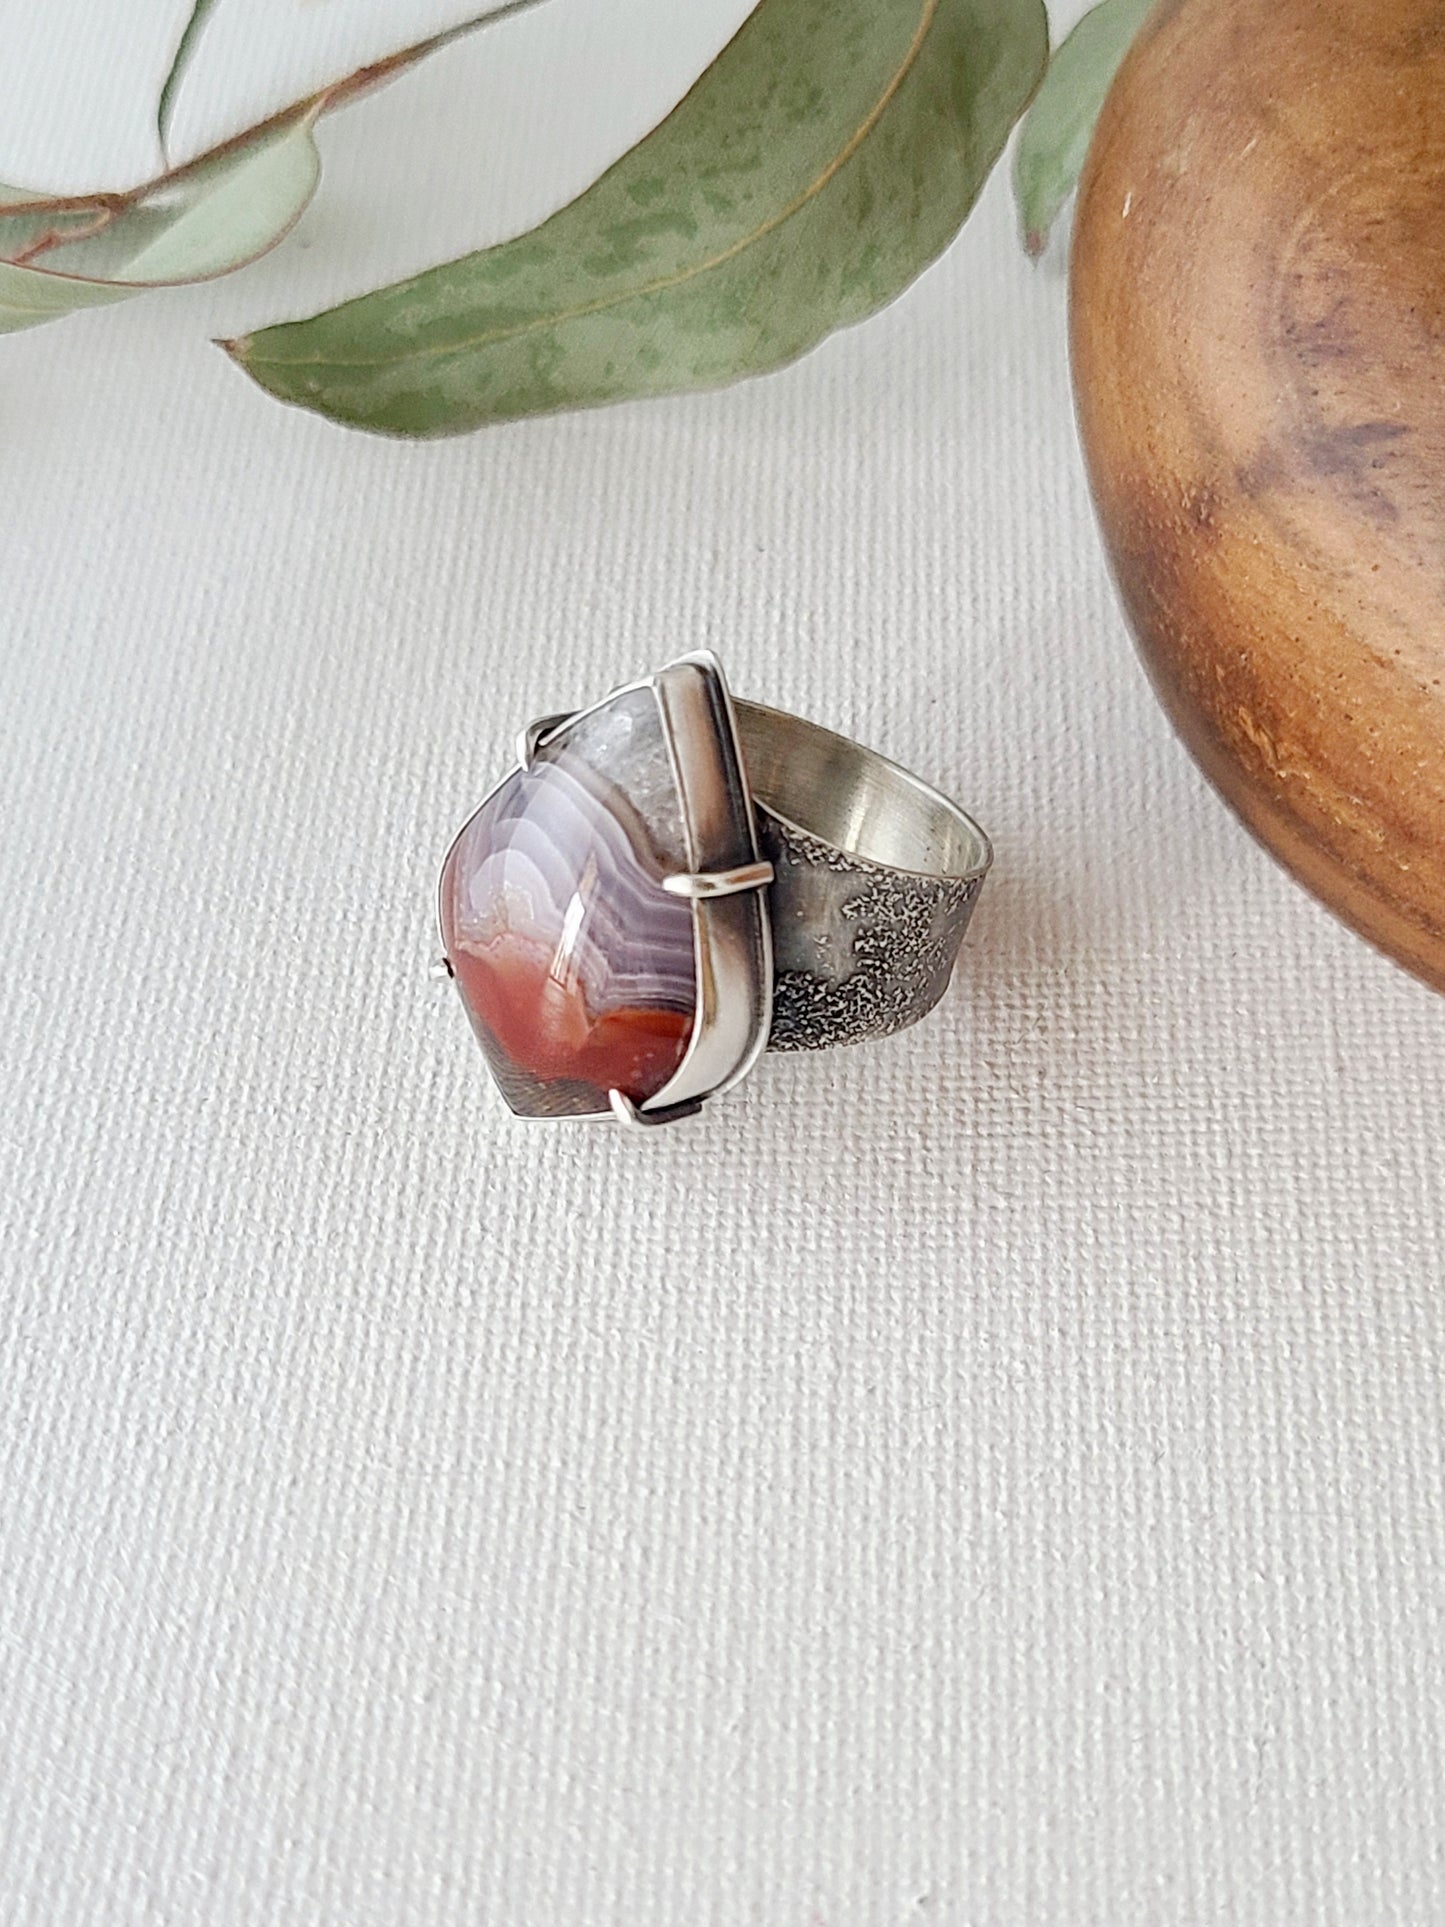 Desert Canyon Ring with Laguna Lace Agate-size 10 US